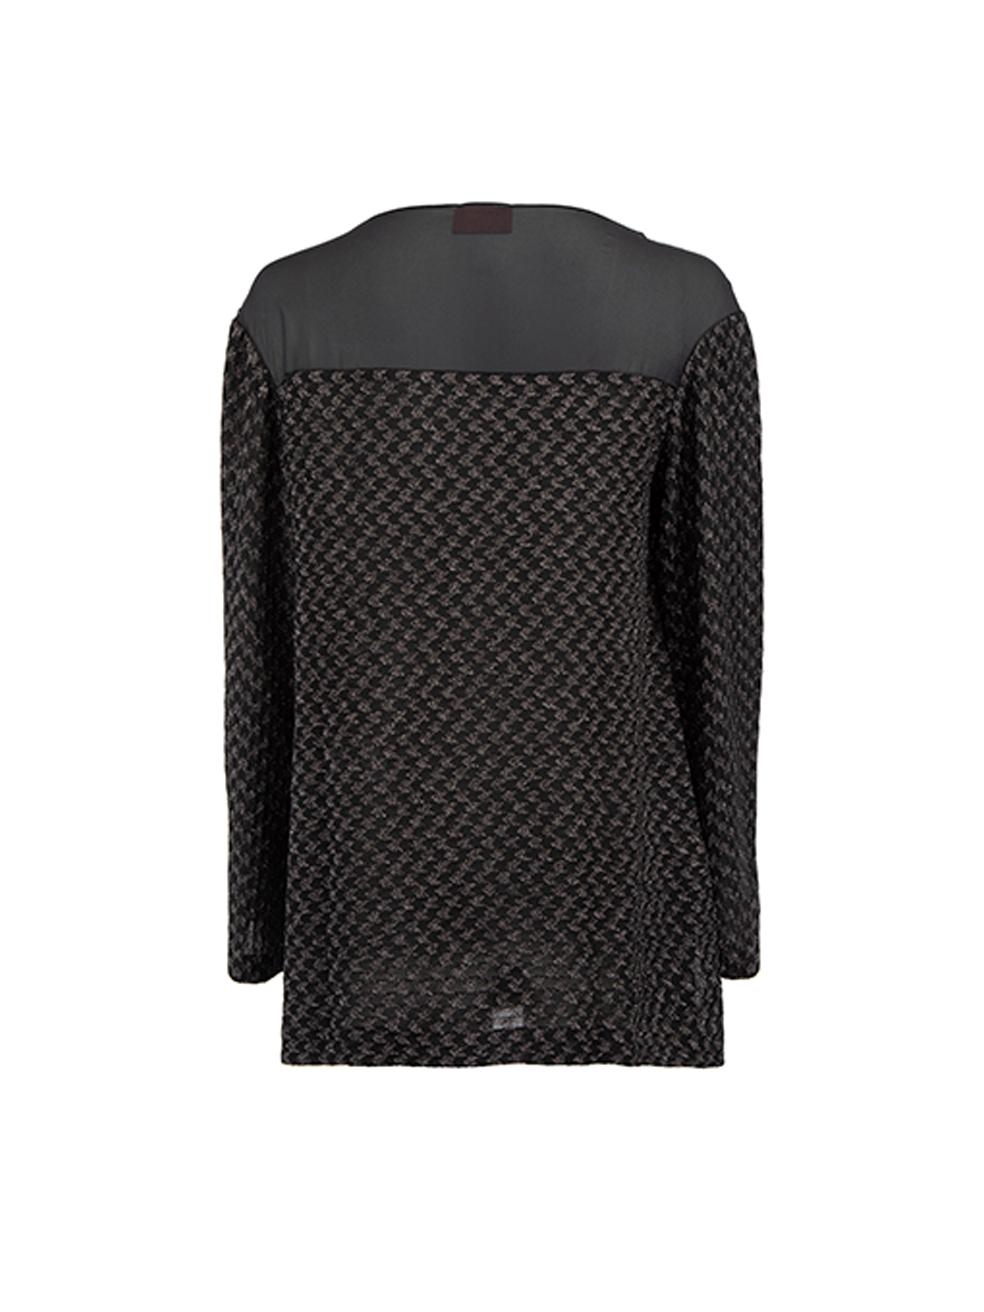 Pre-Loved Missoni Women's Black Mesh Neckline Metallic Houndstooth Top In Excellent Condition For Sale In London, GB